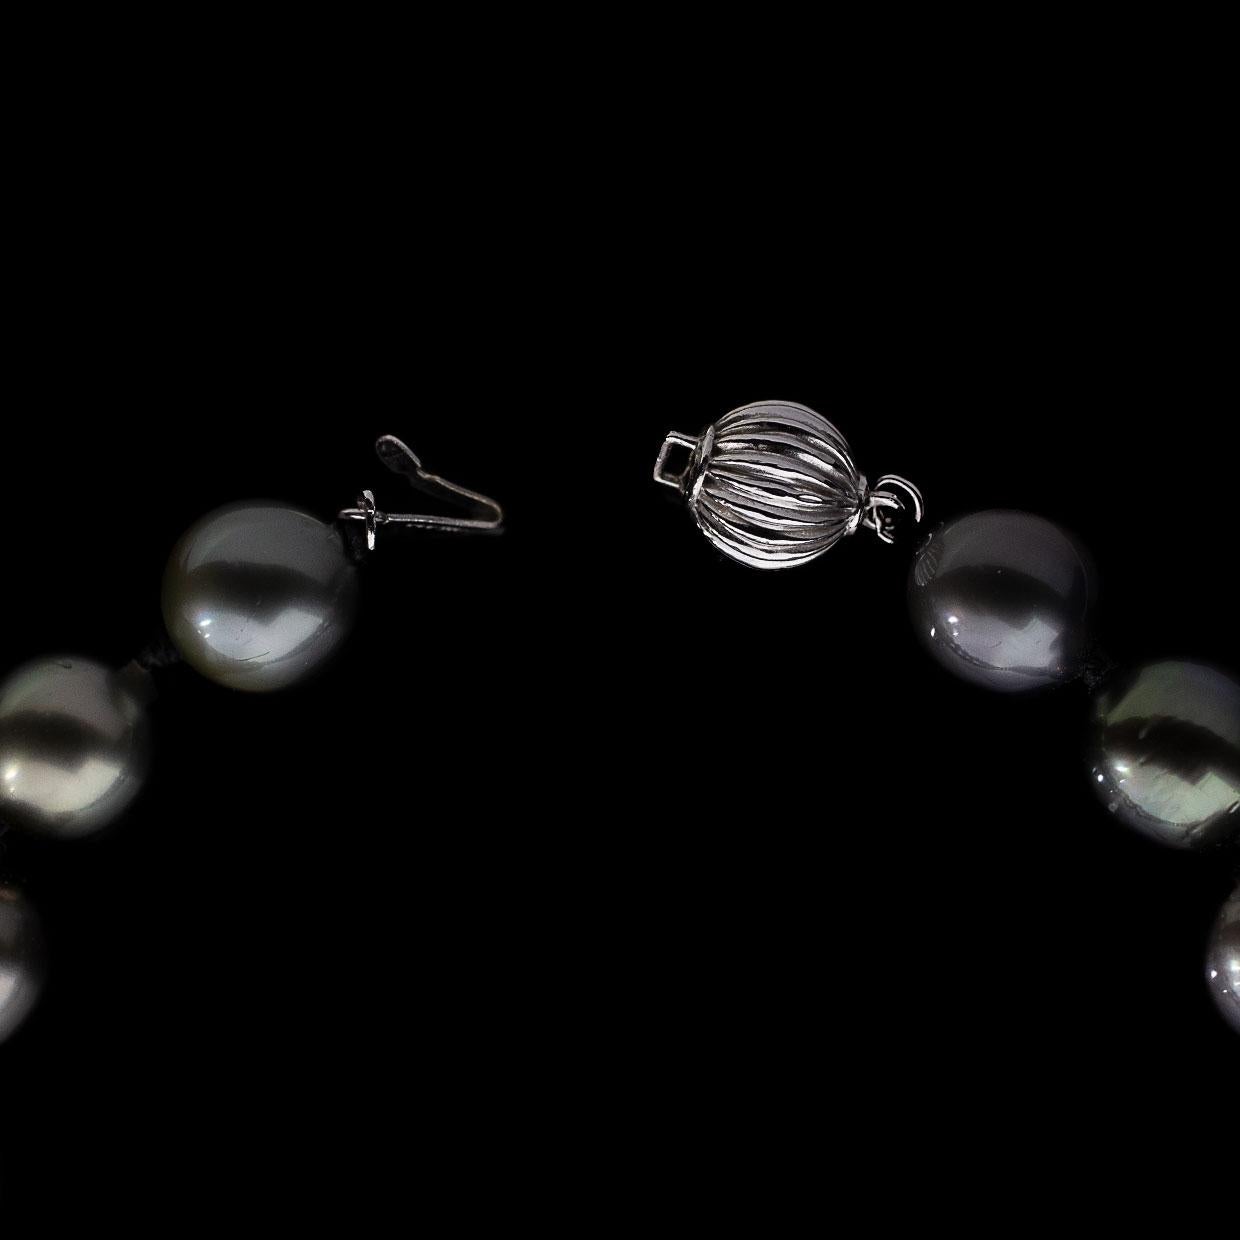 Item Details 325-466
Main Stone  Pearl
Main Stone Type Tahitian
Main Stone Color Black
Estimated Retail $4,500.00
Metal White Gold
Style Strand/String
Fastening Pearl Clasp

Stone 1 Information
Stone Type Pearl
Stone Shape Tahitian
Stone Color